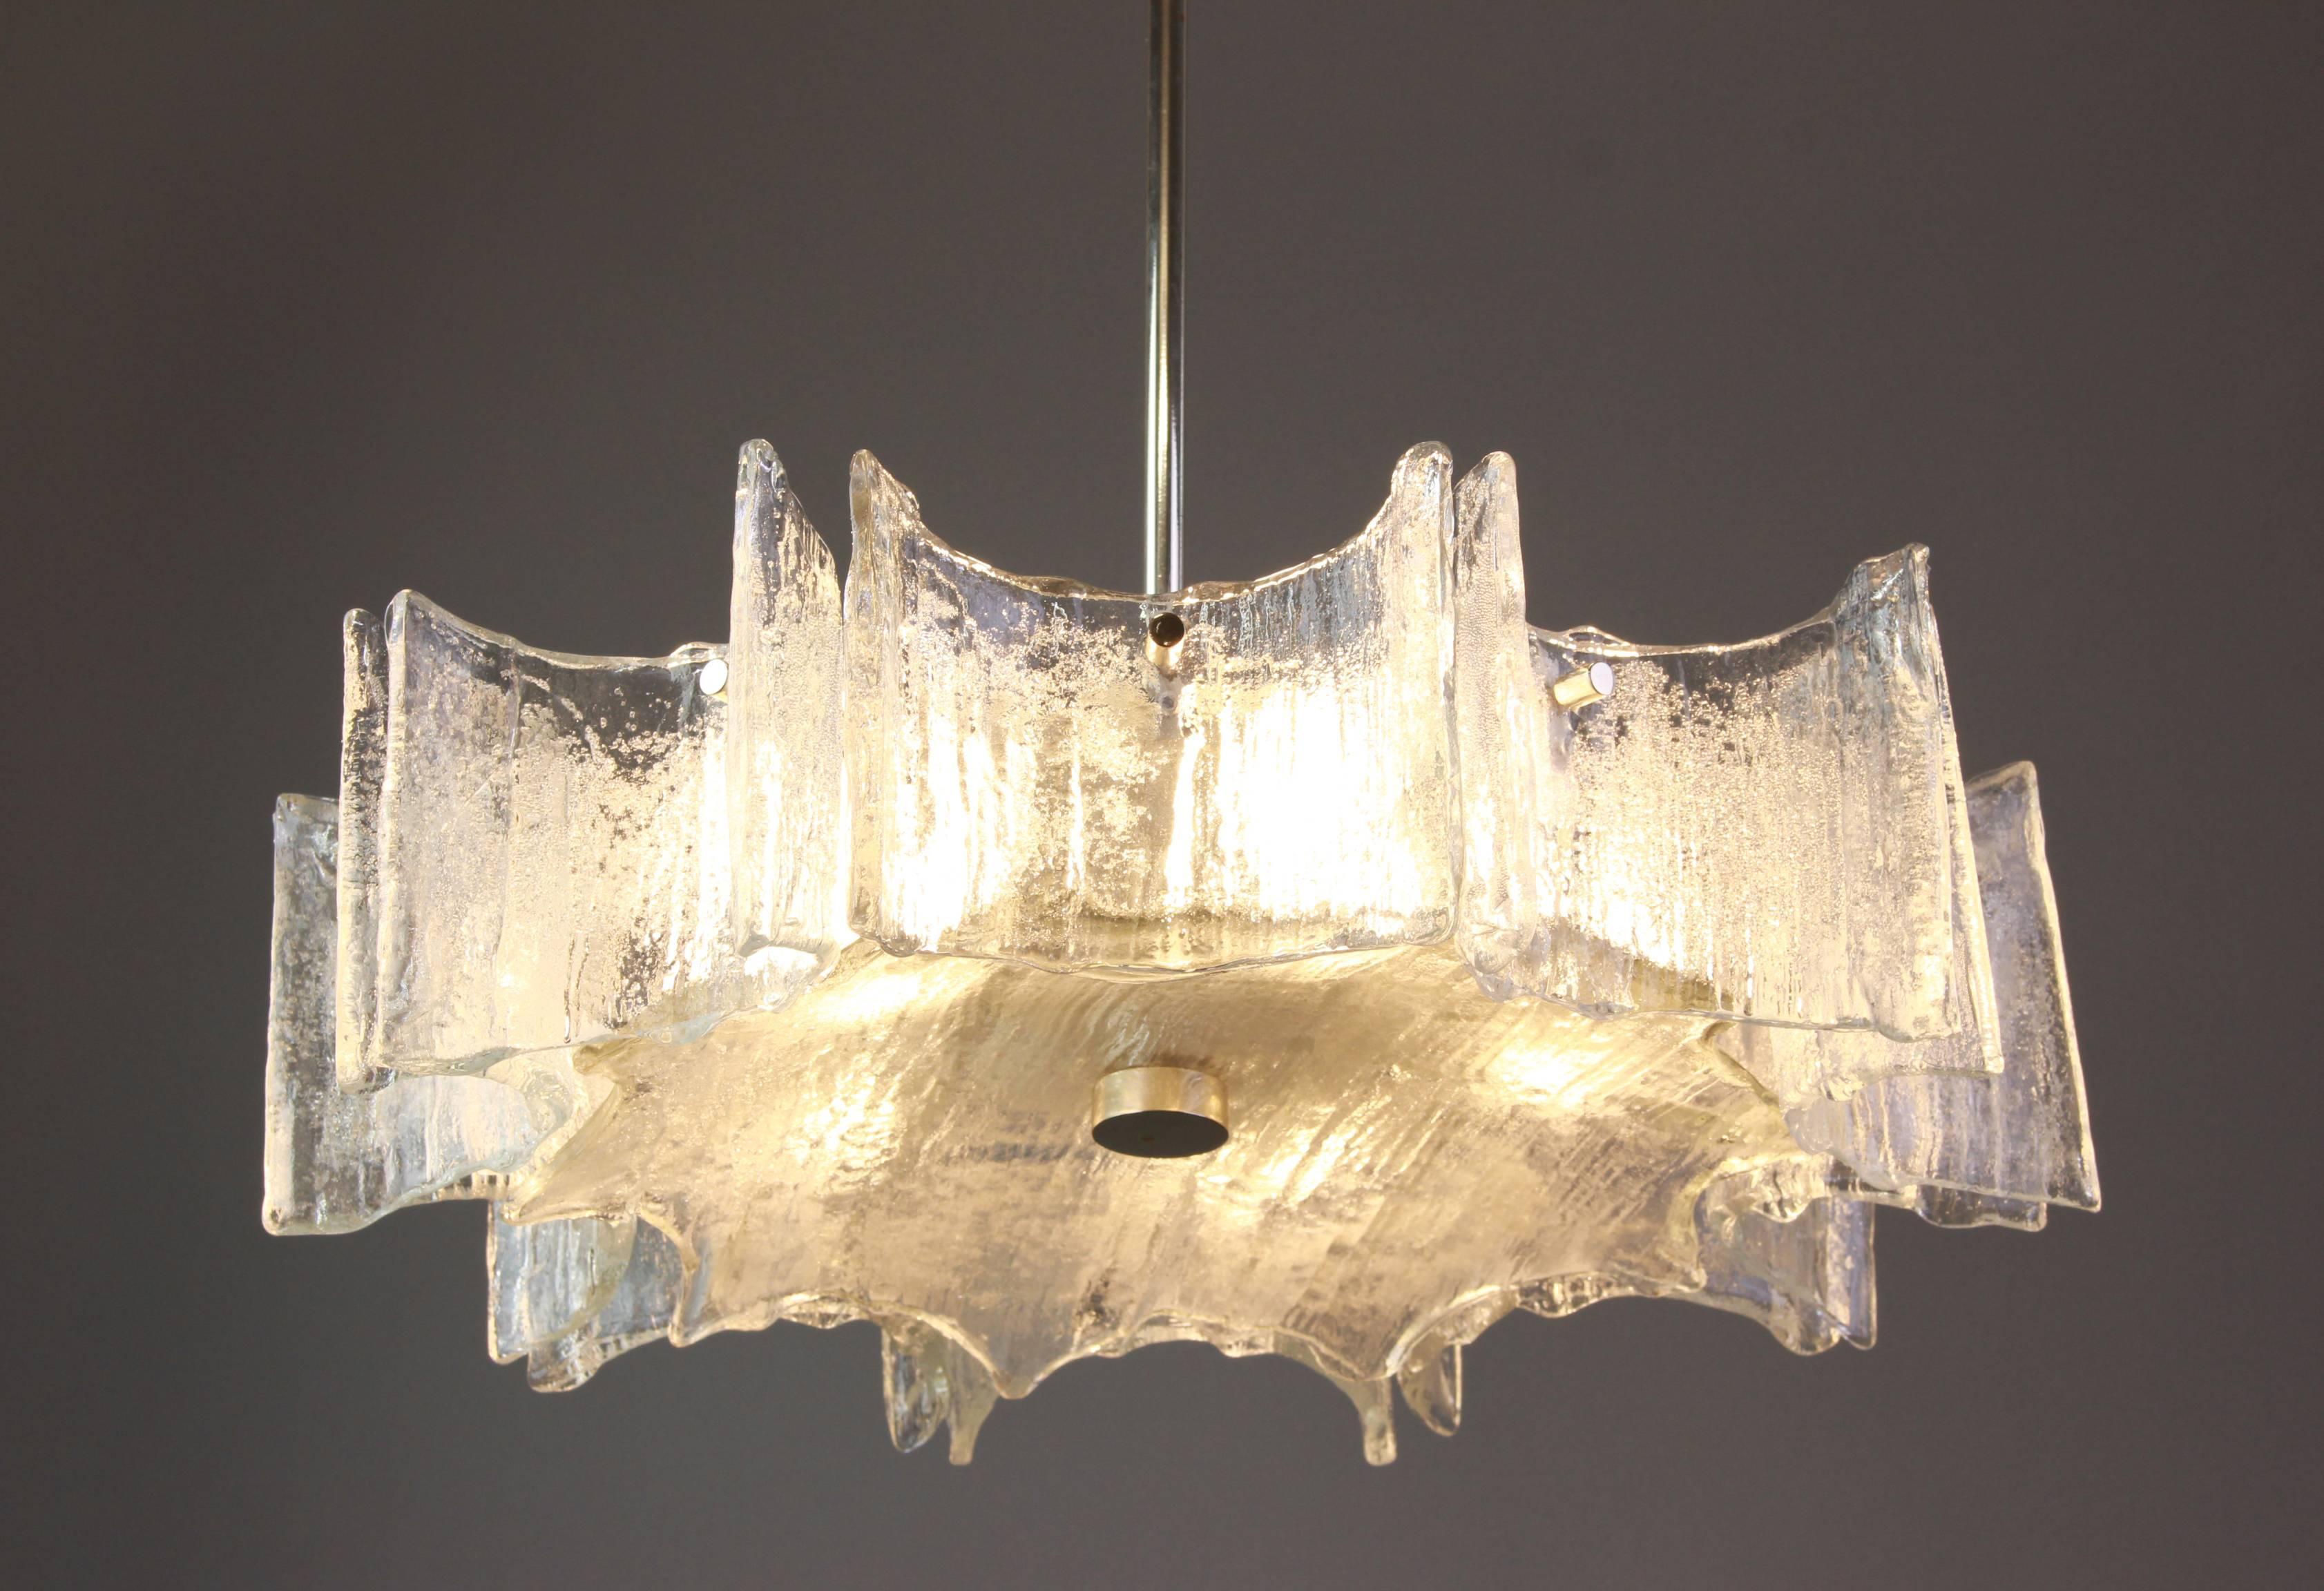 Fantastic star shape chandelier by Kaiser, Germany, manufactured, circa 1960 -1969. Curved Murano glasses suspended from a fixture.

Sockets: Five x E27 Standard bulbs (max. 60 watt each)
Light bulbs are not included. It is possible to install this